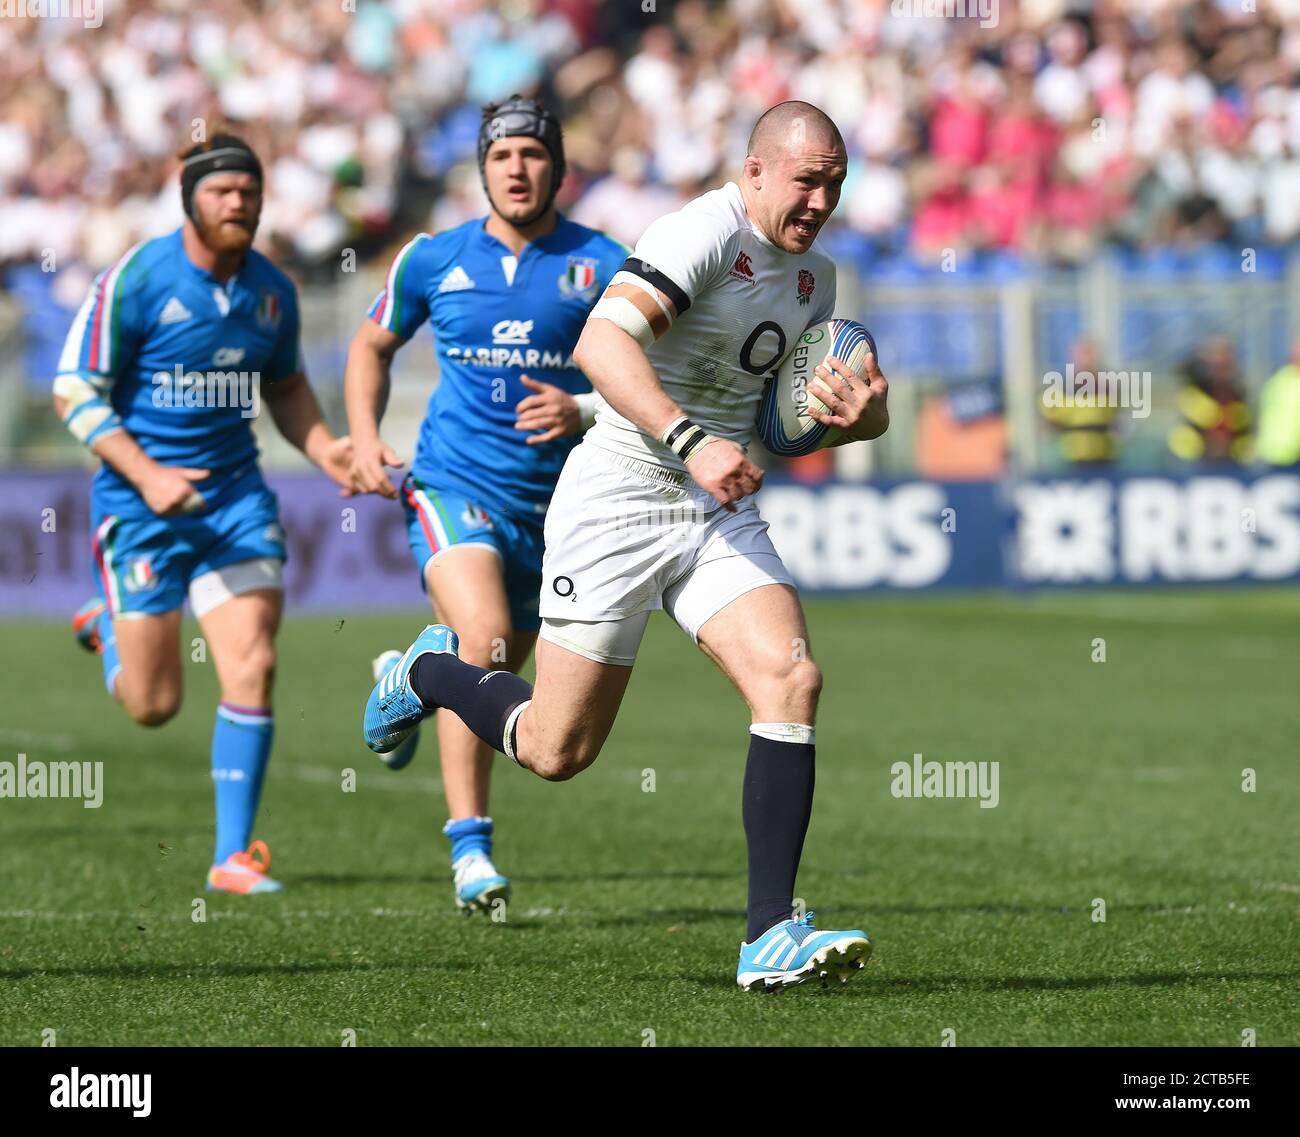 Mike Brown charges through to score a try for England  Italy v England Six Nations Championship   PICTURE CREDIT : © MARK PAIN / ALAMY Stock Photo